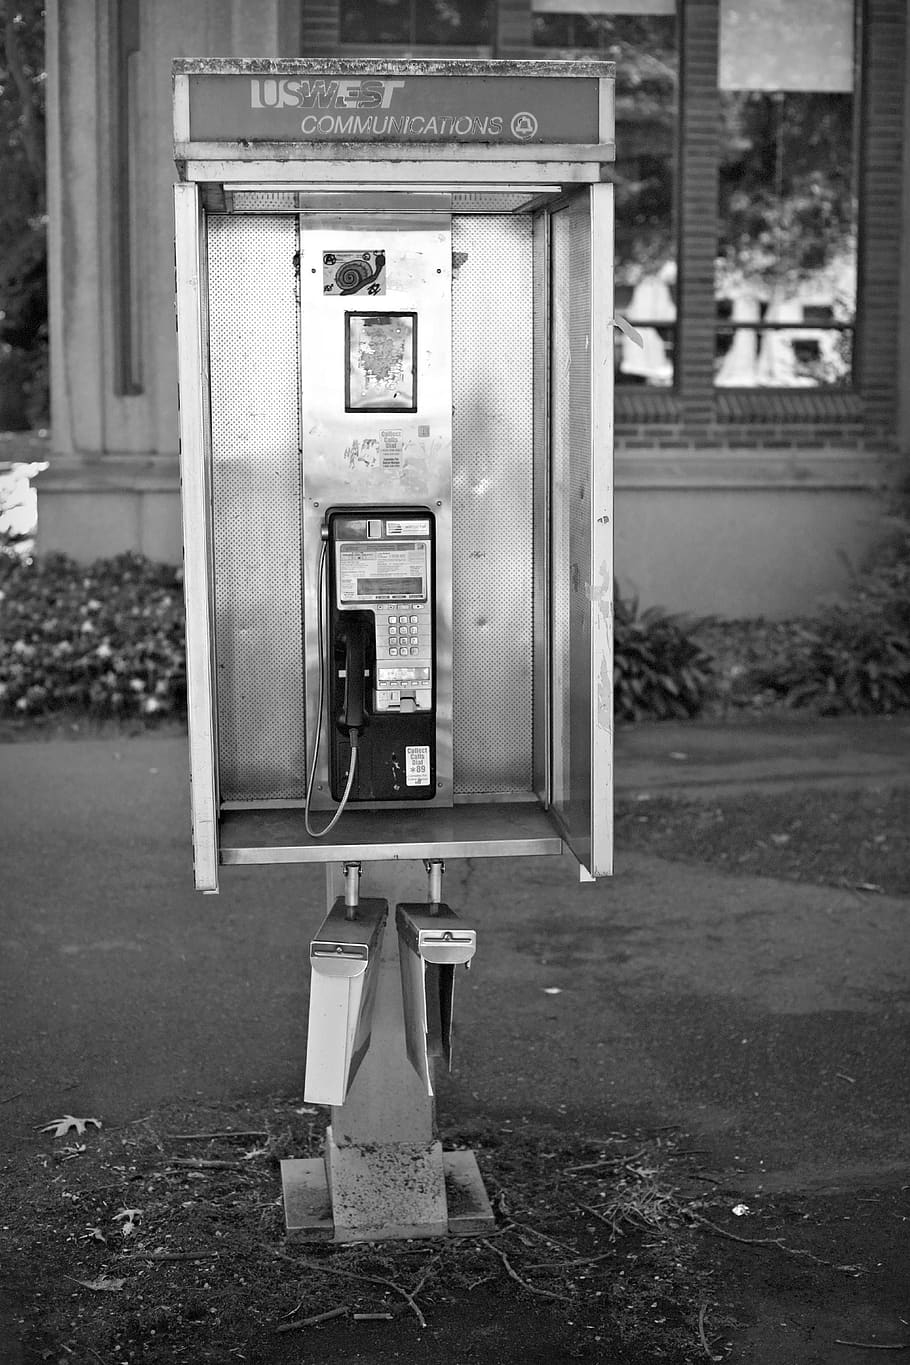 phone booth, payphone, telephone, phone, call, communication, technology, connection, telephone booth, pay phone